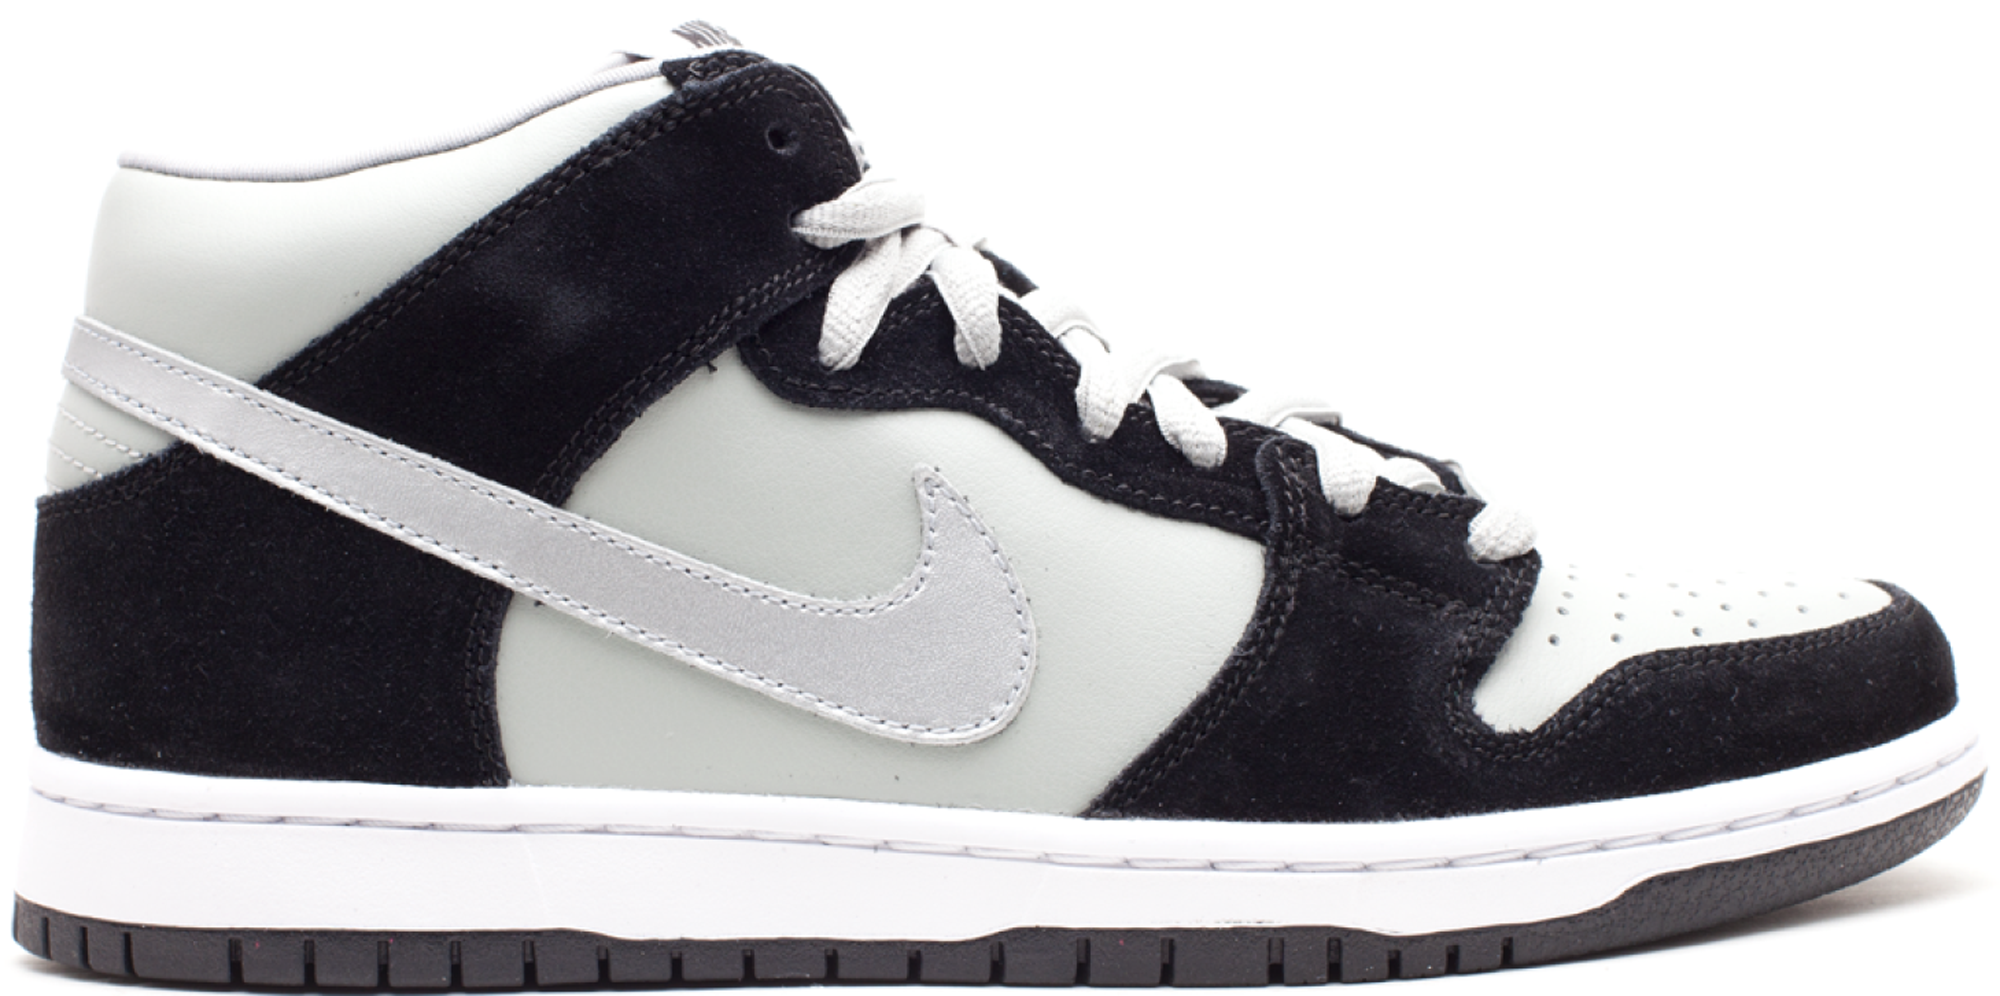 black and silver nike dunks